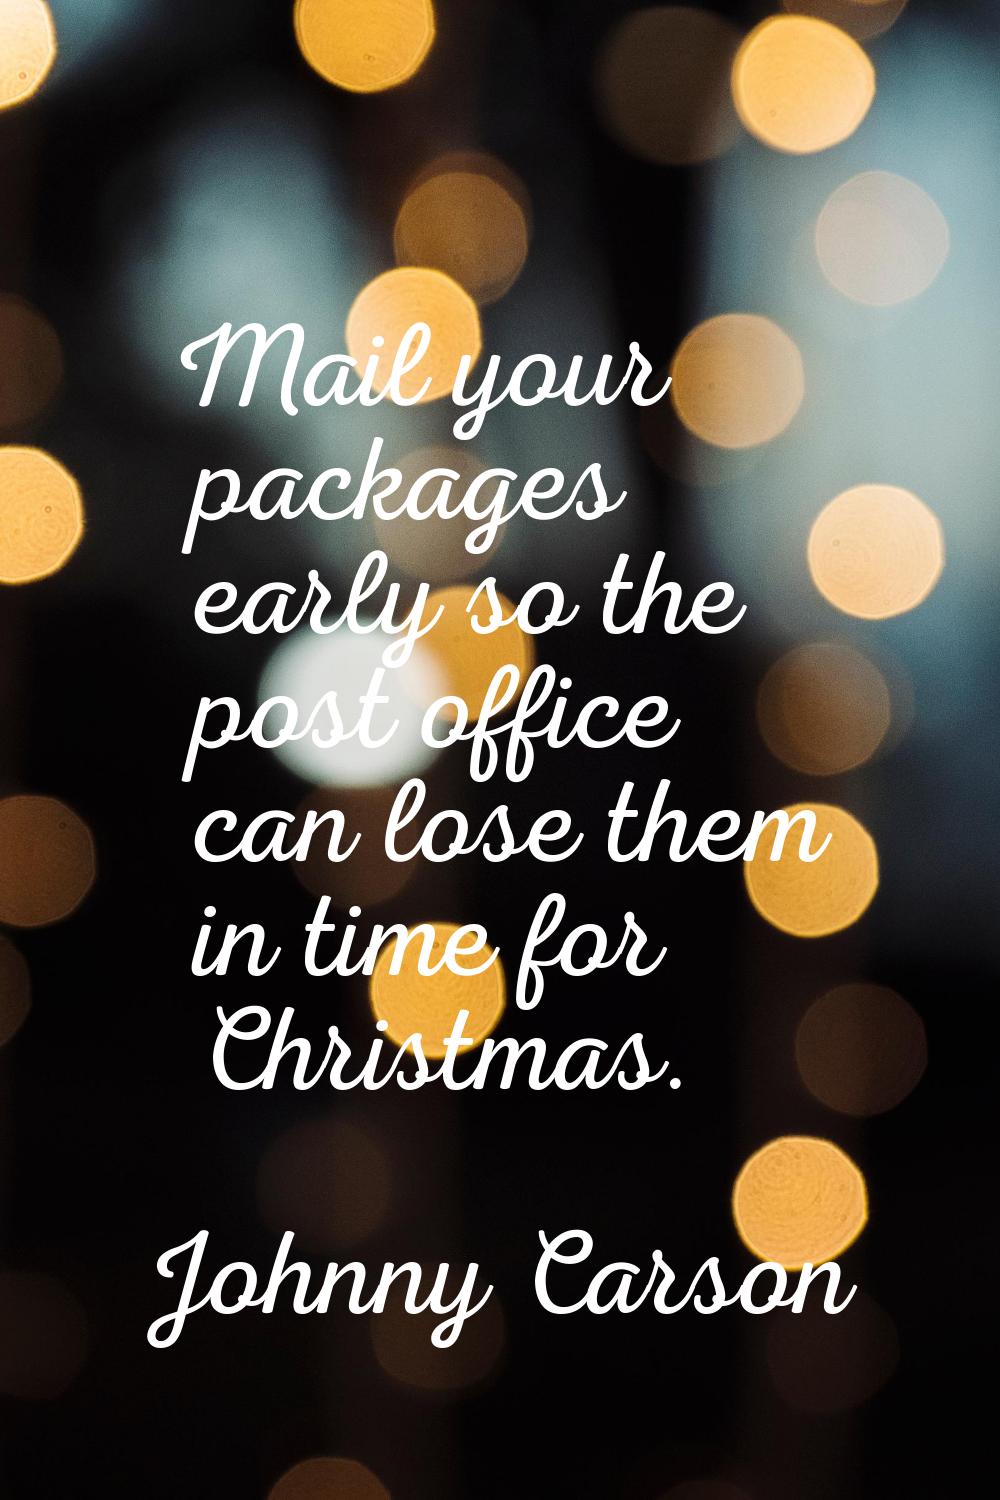 Mail your packages early so the post office can lose them in time for Christmas.